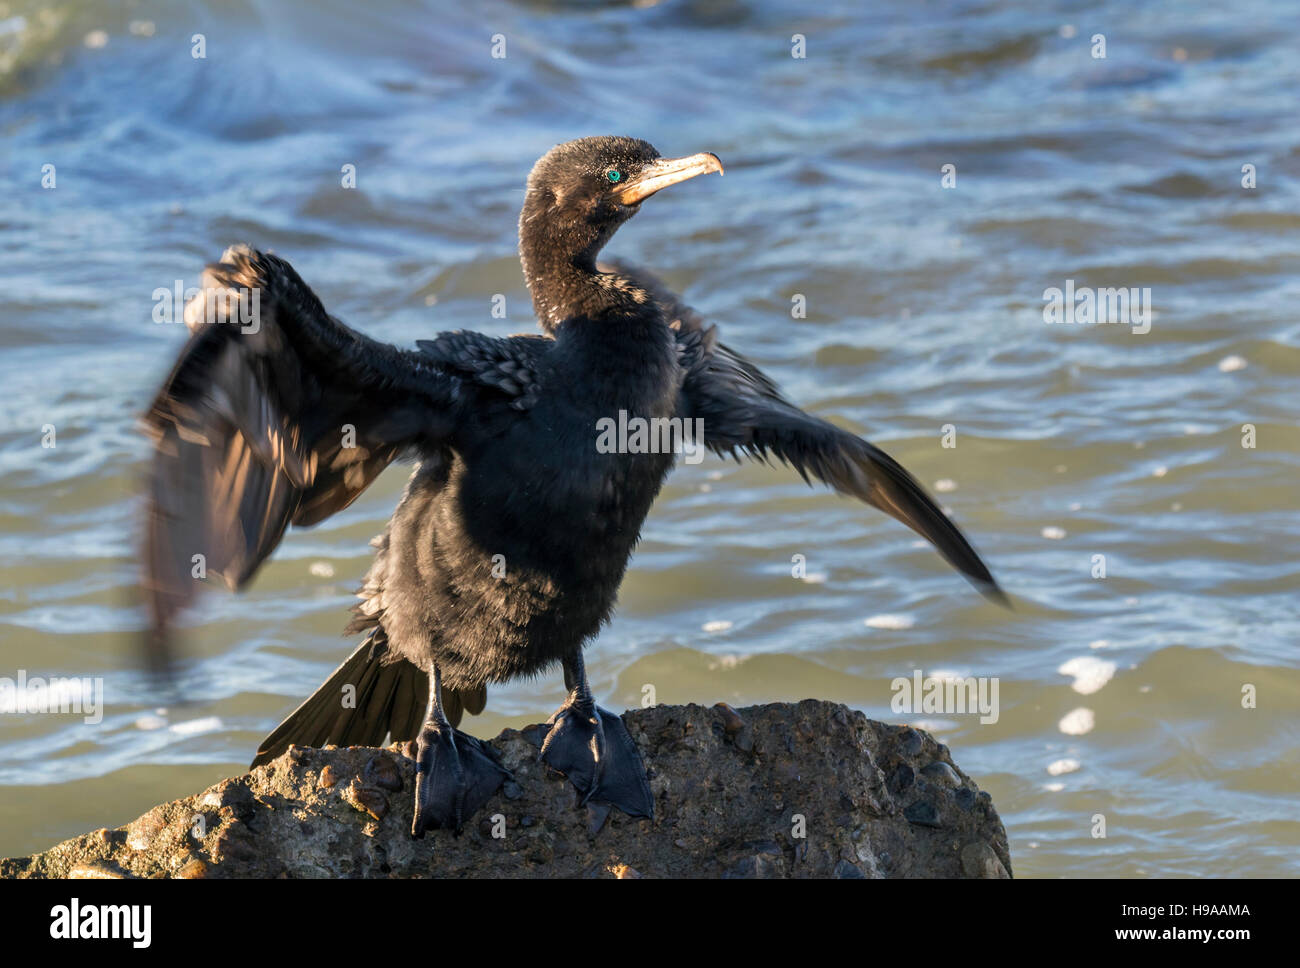 Neotropic or olivaceous cormorant (Nannopterum brasilianum) drying feathers and splashing wings after swimming, Galveston, Texas, USA. Stock Photo